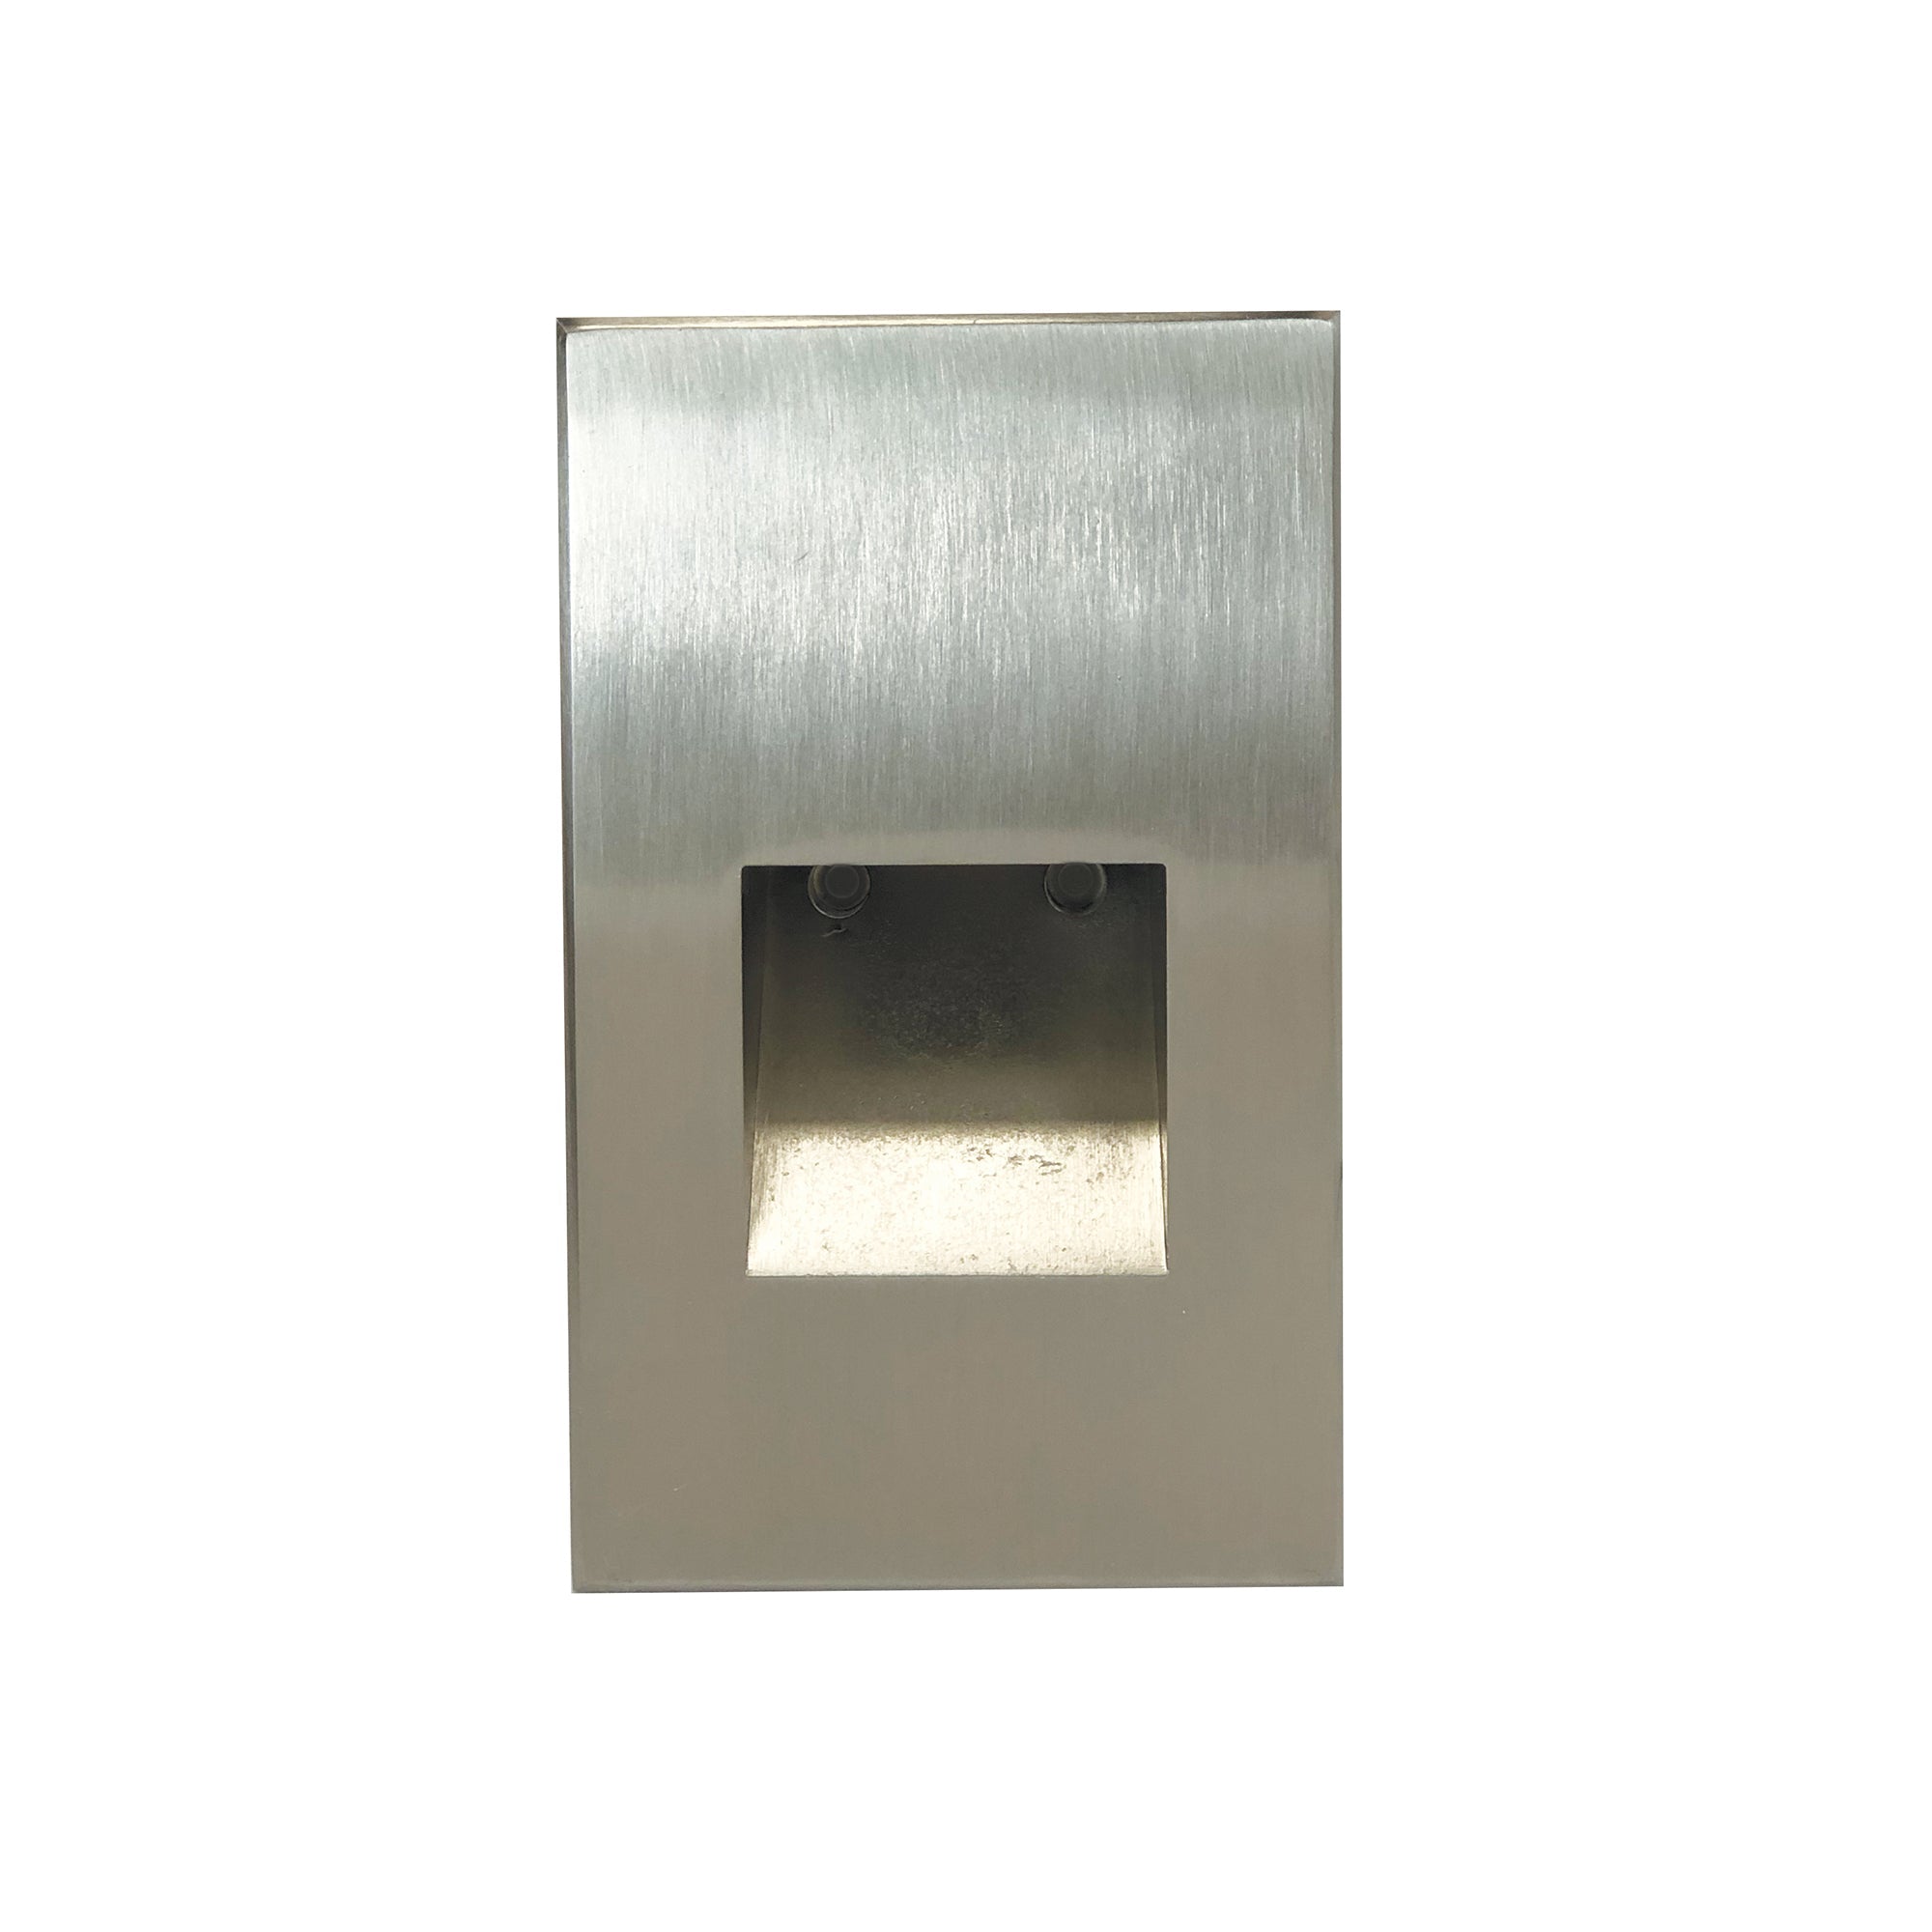 Nora Lighting NSW-730/30BN - Step Light - Ari LED Step Light w/ Vertical Wall Wash Face Plate, 37lm / 2.5W, 3000K, Brushed Nickel Finish